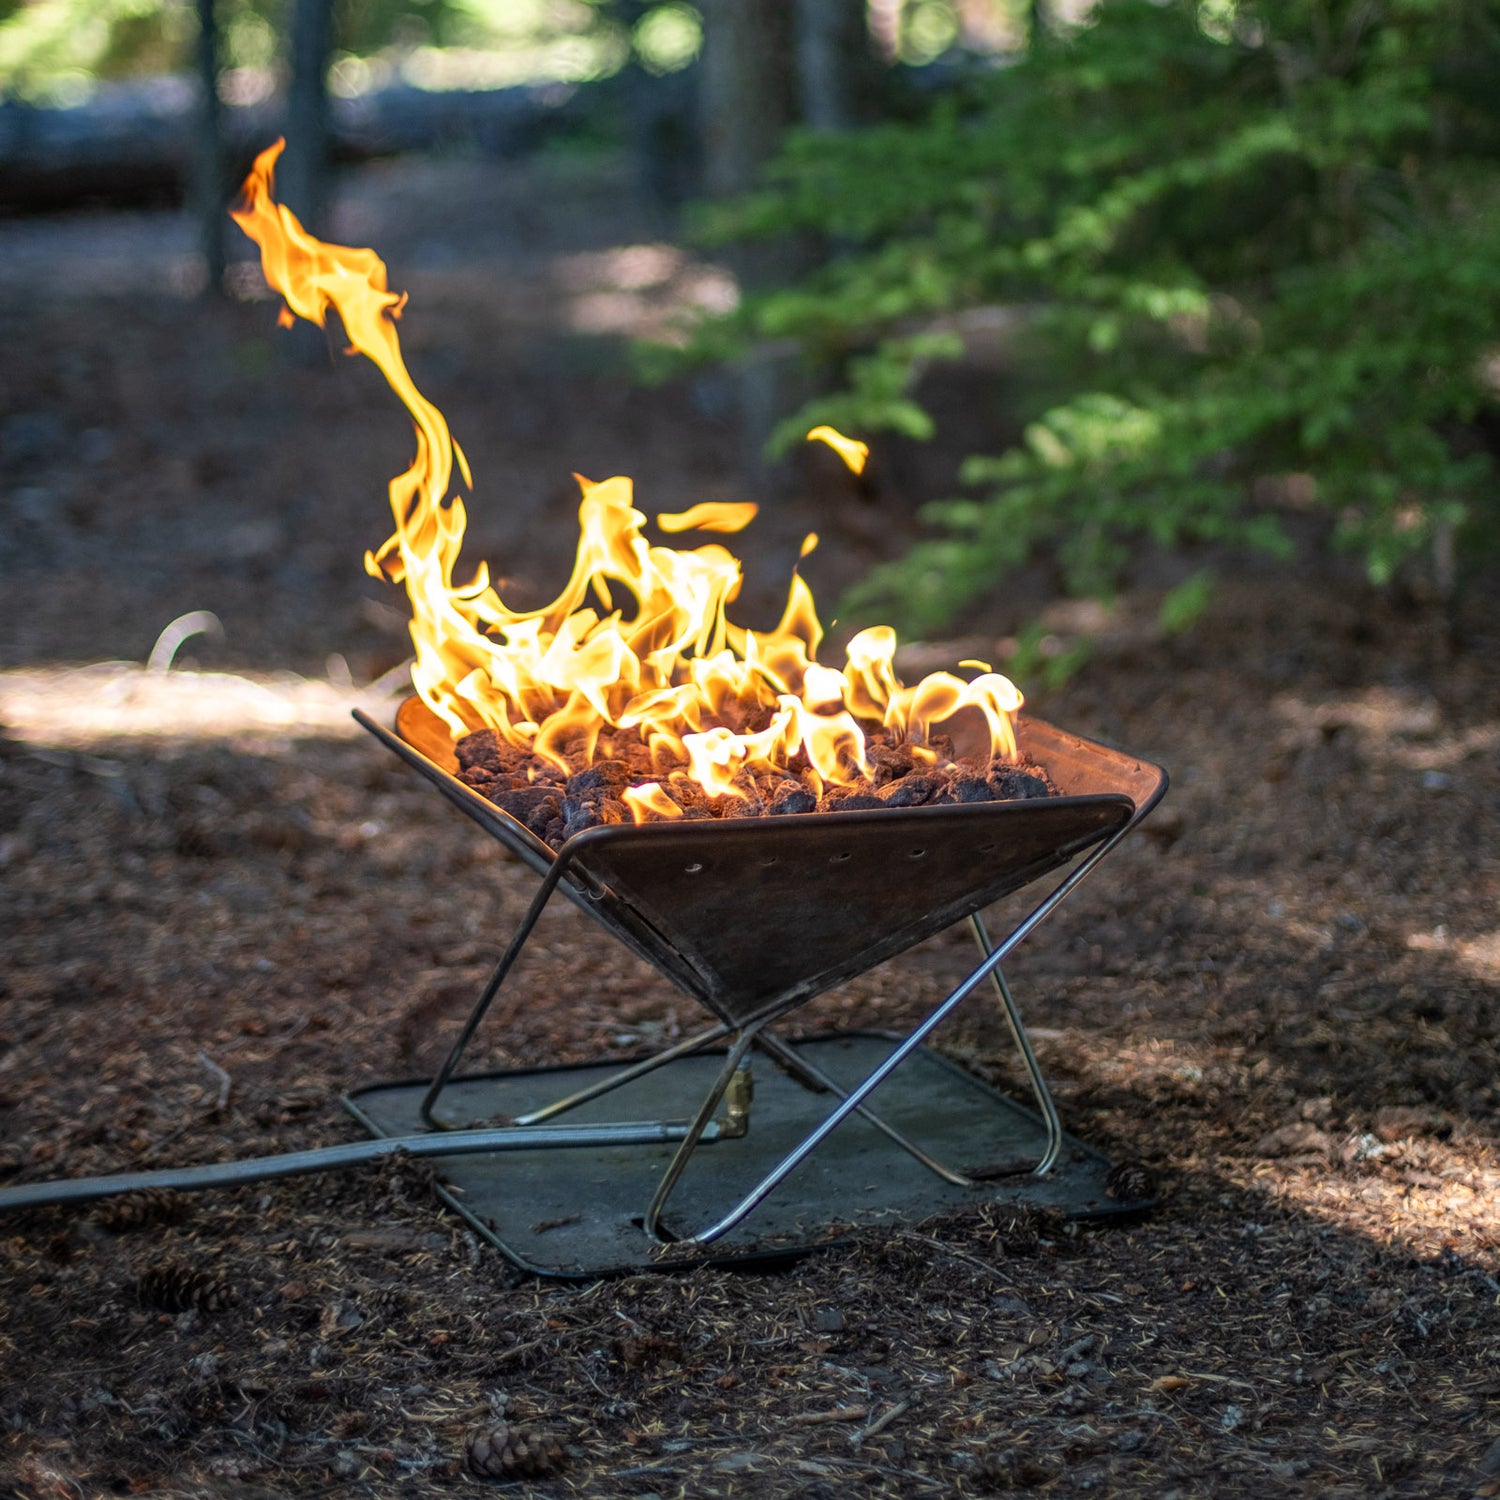 Image of the Zutto in use, a propane adapter for snow peak takibi grill fire pit campfire